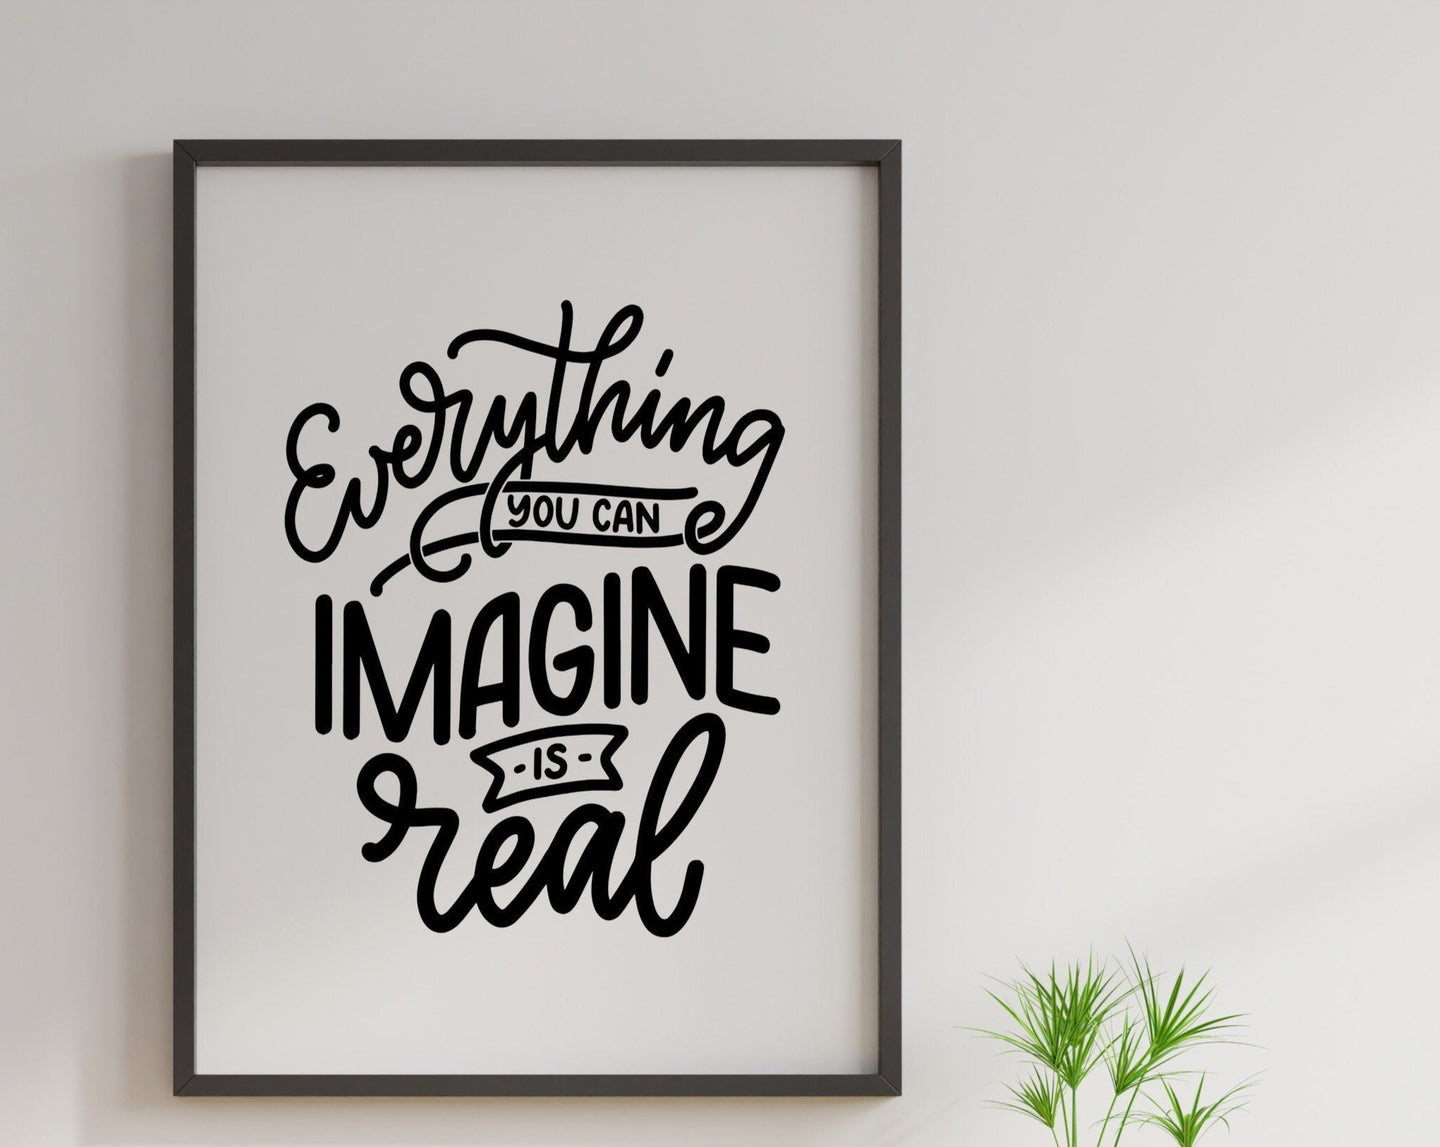 Everything you can imagine is real - Pablo Picasso Quote Print